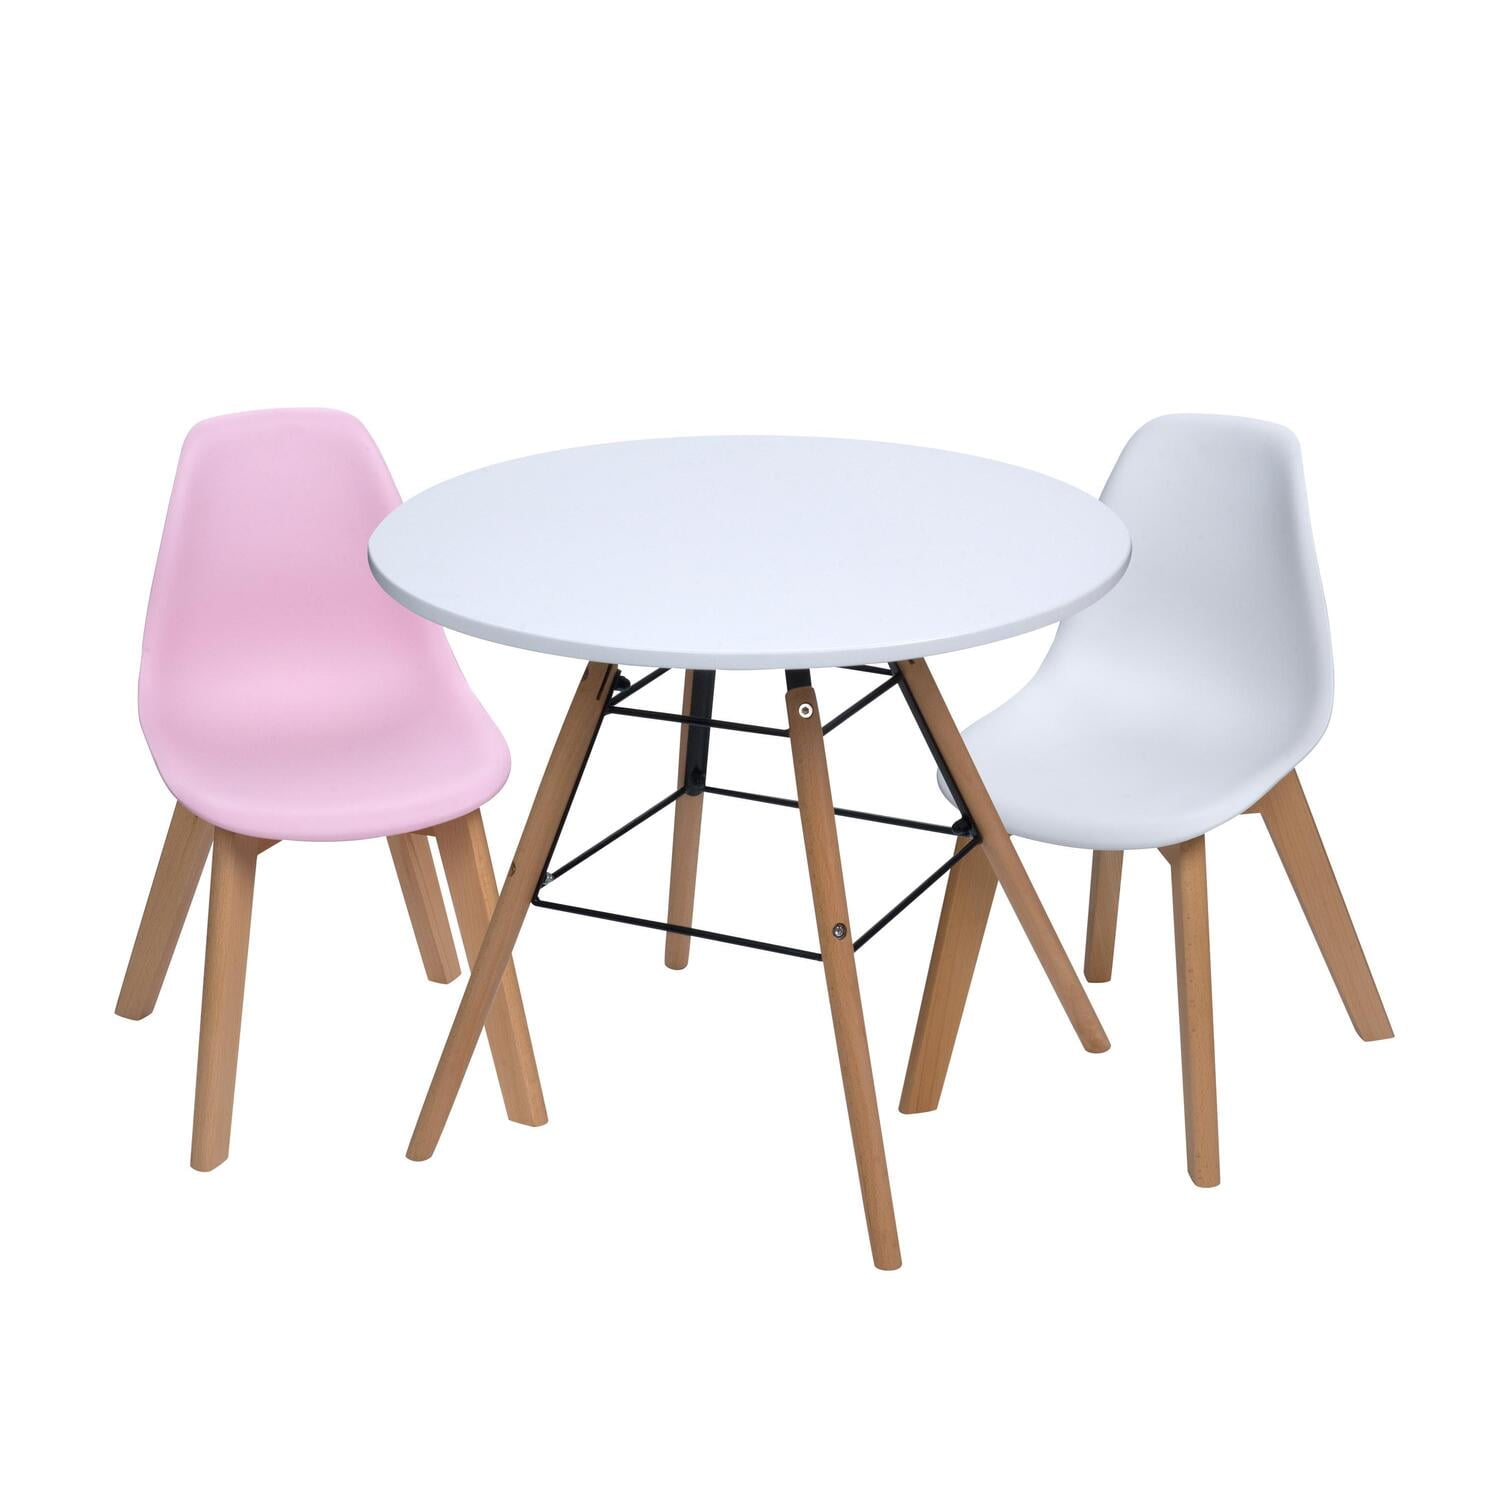 Gift Mark Modern Kids Table And Chair Set 1 Table 2 Chairs Colorpink White Walmartcom Walmartcom